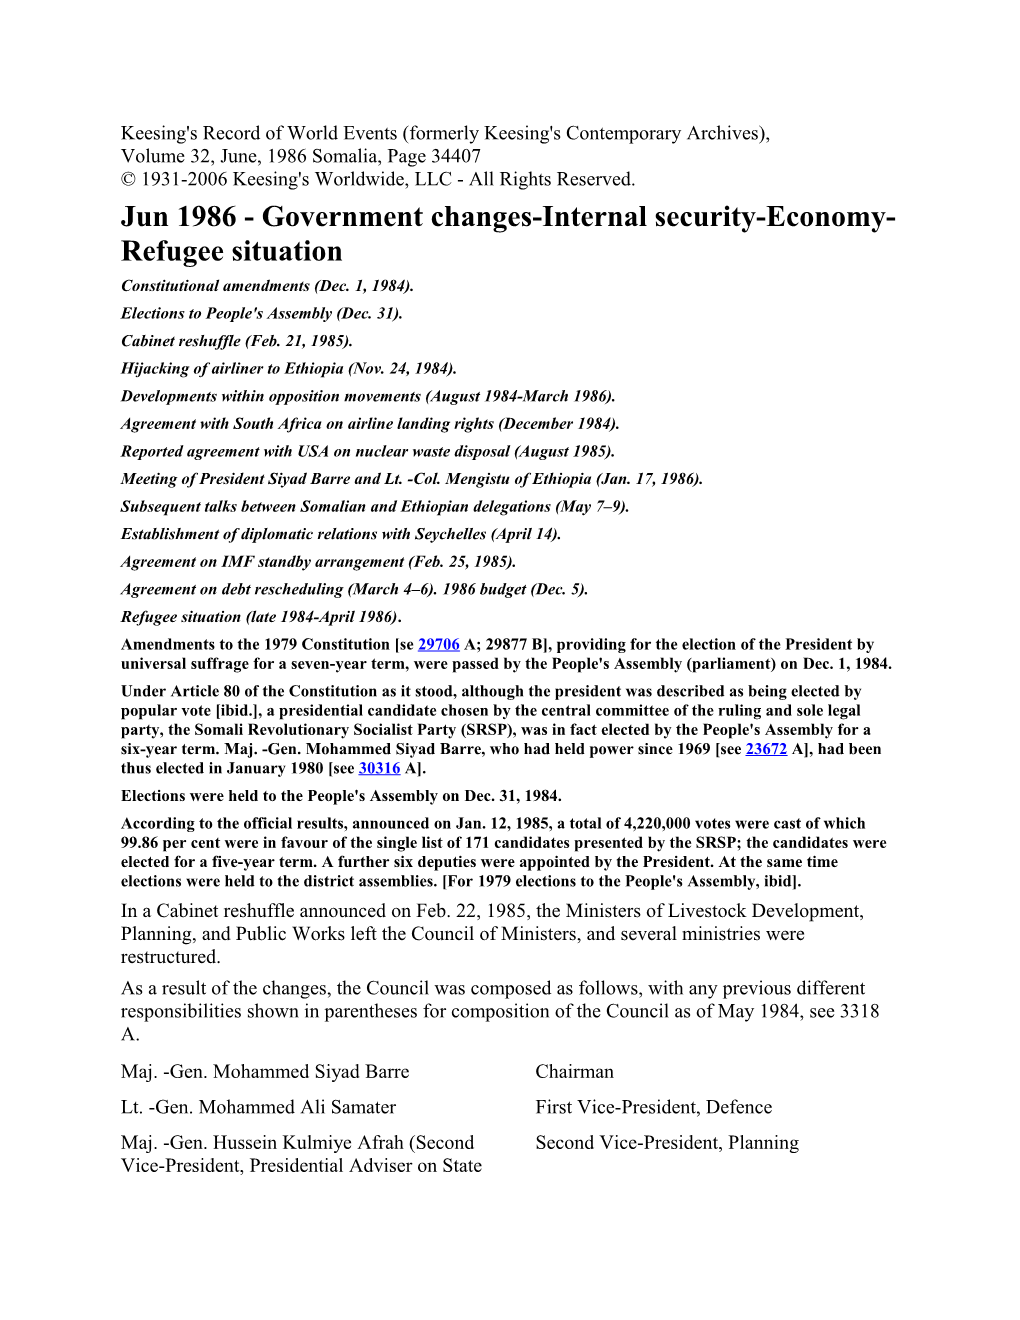 Jun 1986 - Government Changes-Internal Security-Economy-Refugee Situation